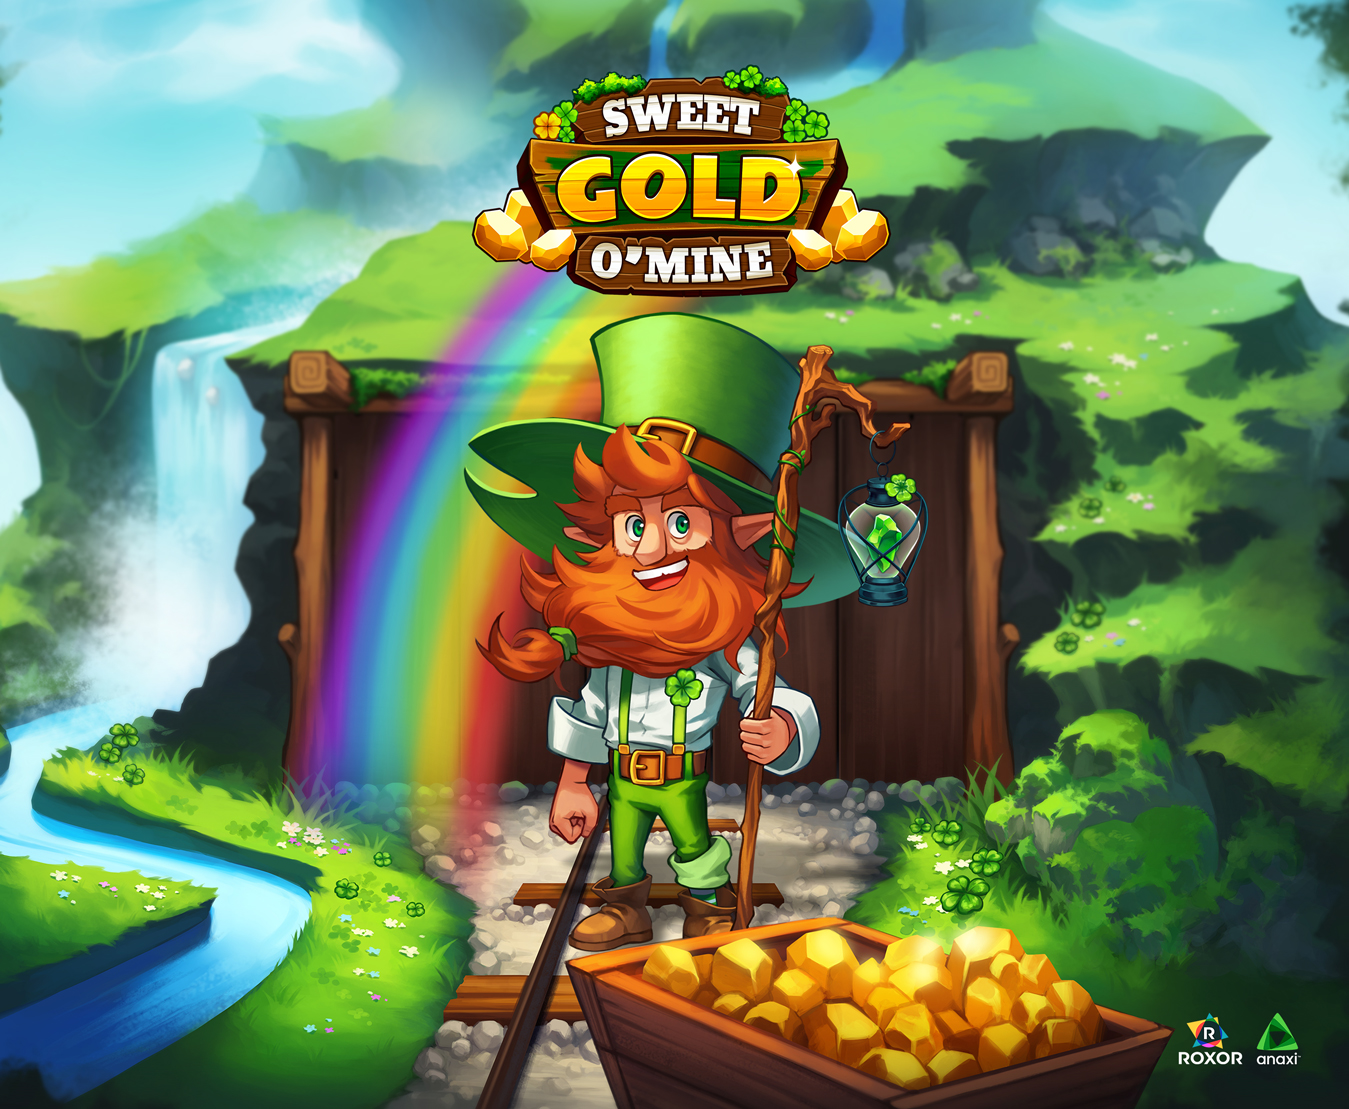 Sweet Gold O'Mine - West Pier Gaming